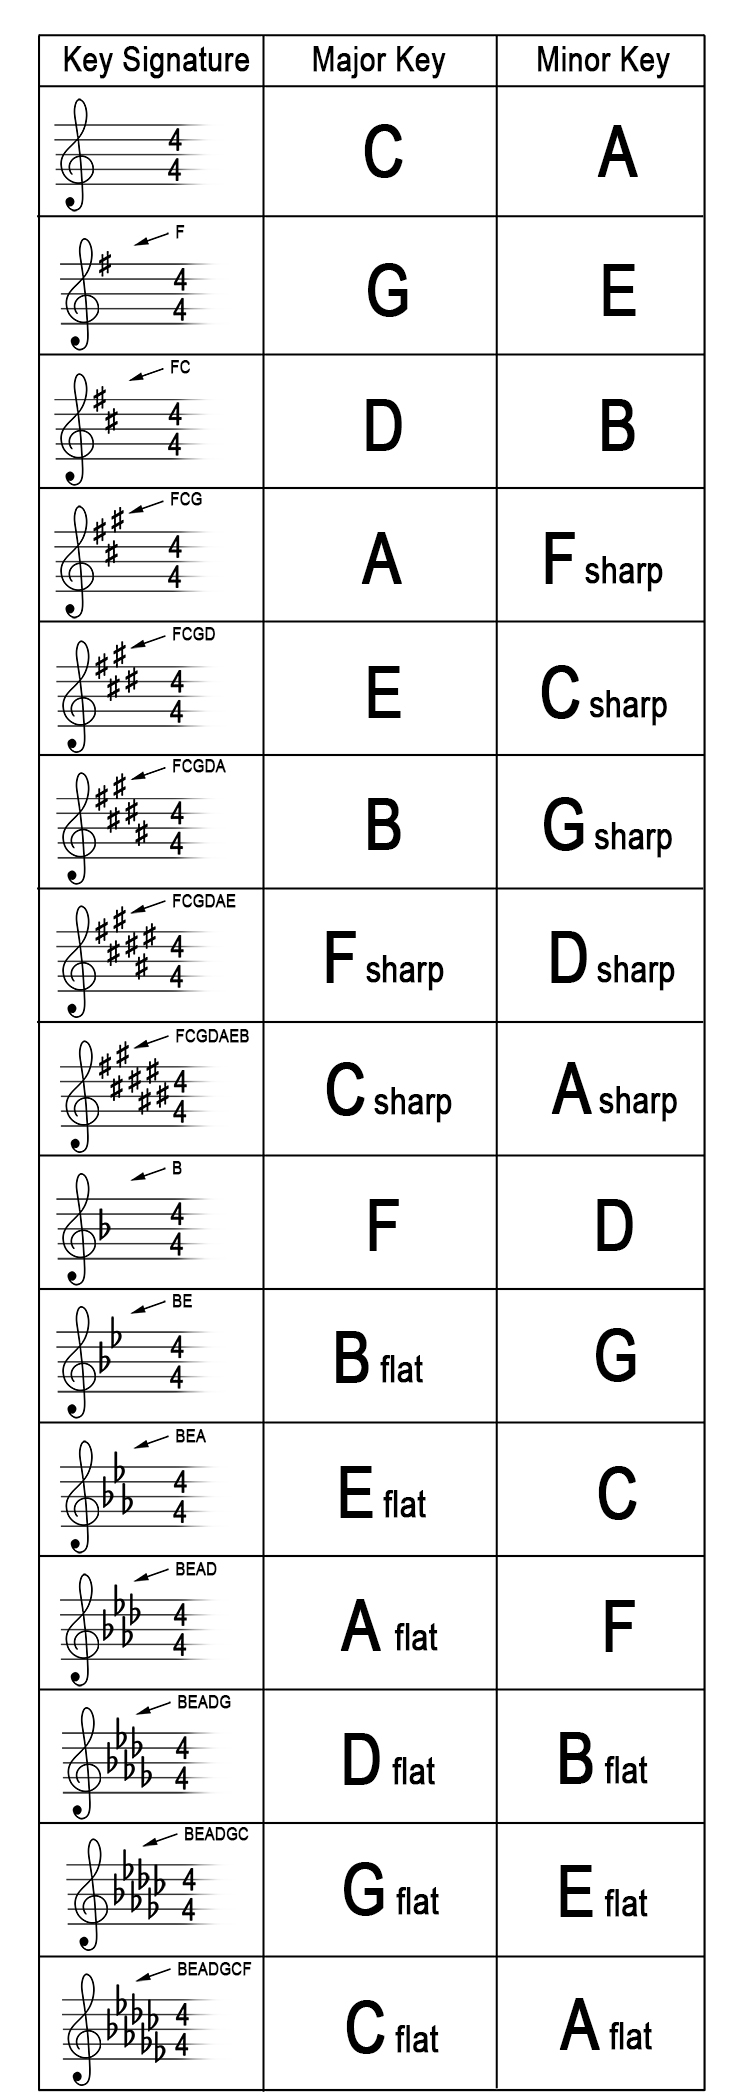 All of the key signatures listed on a table